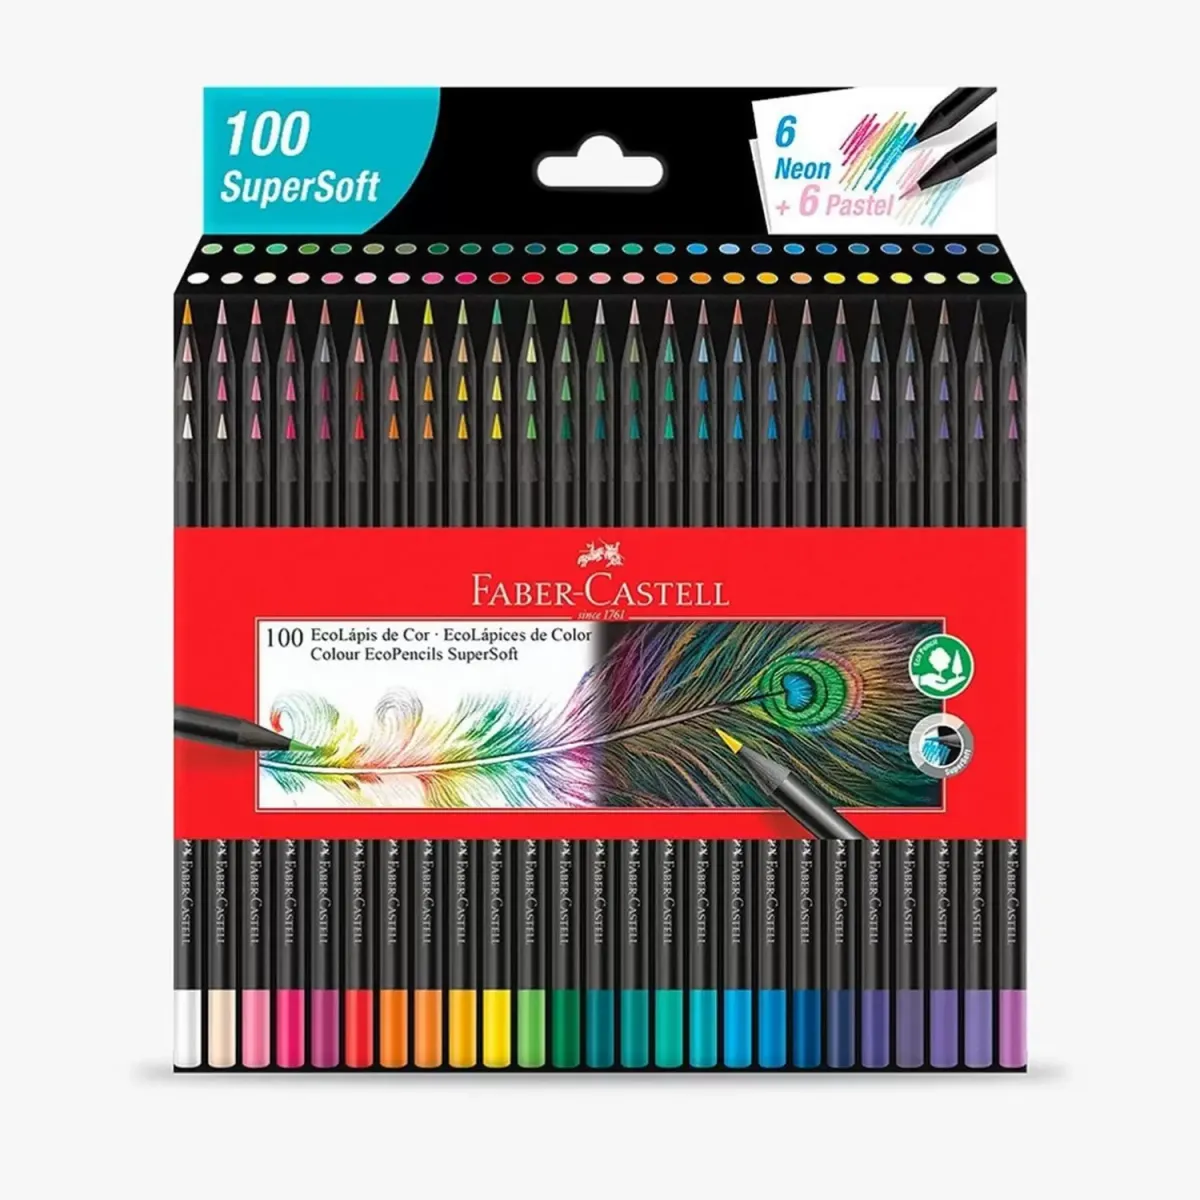 Ecolapis Faber Castell 100 Cores image number 0